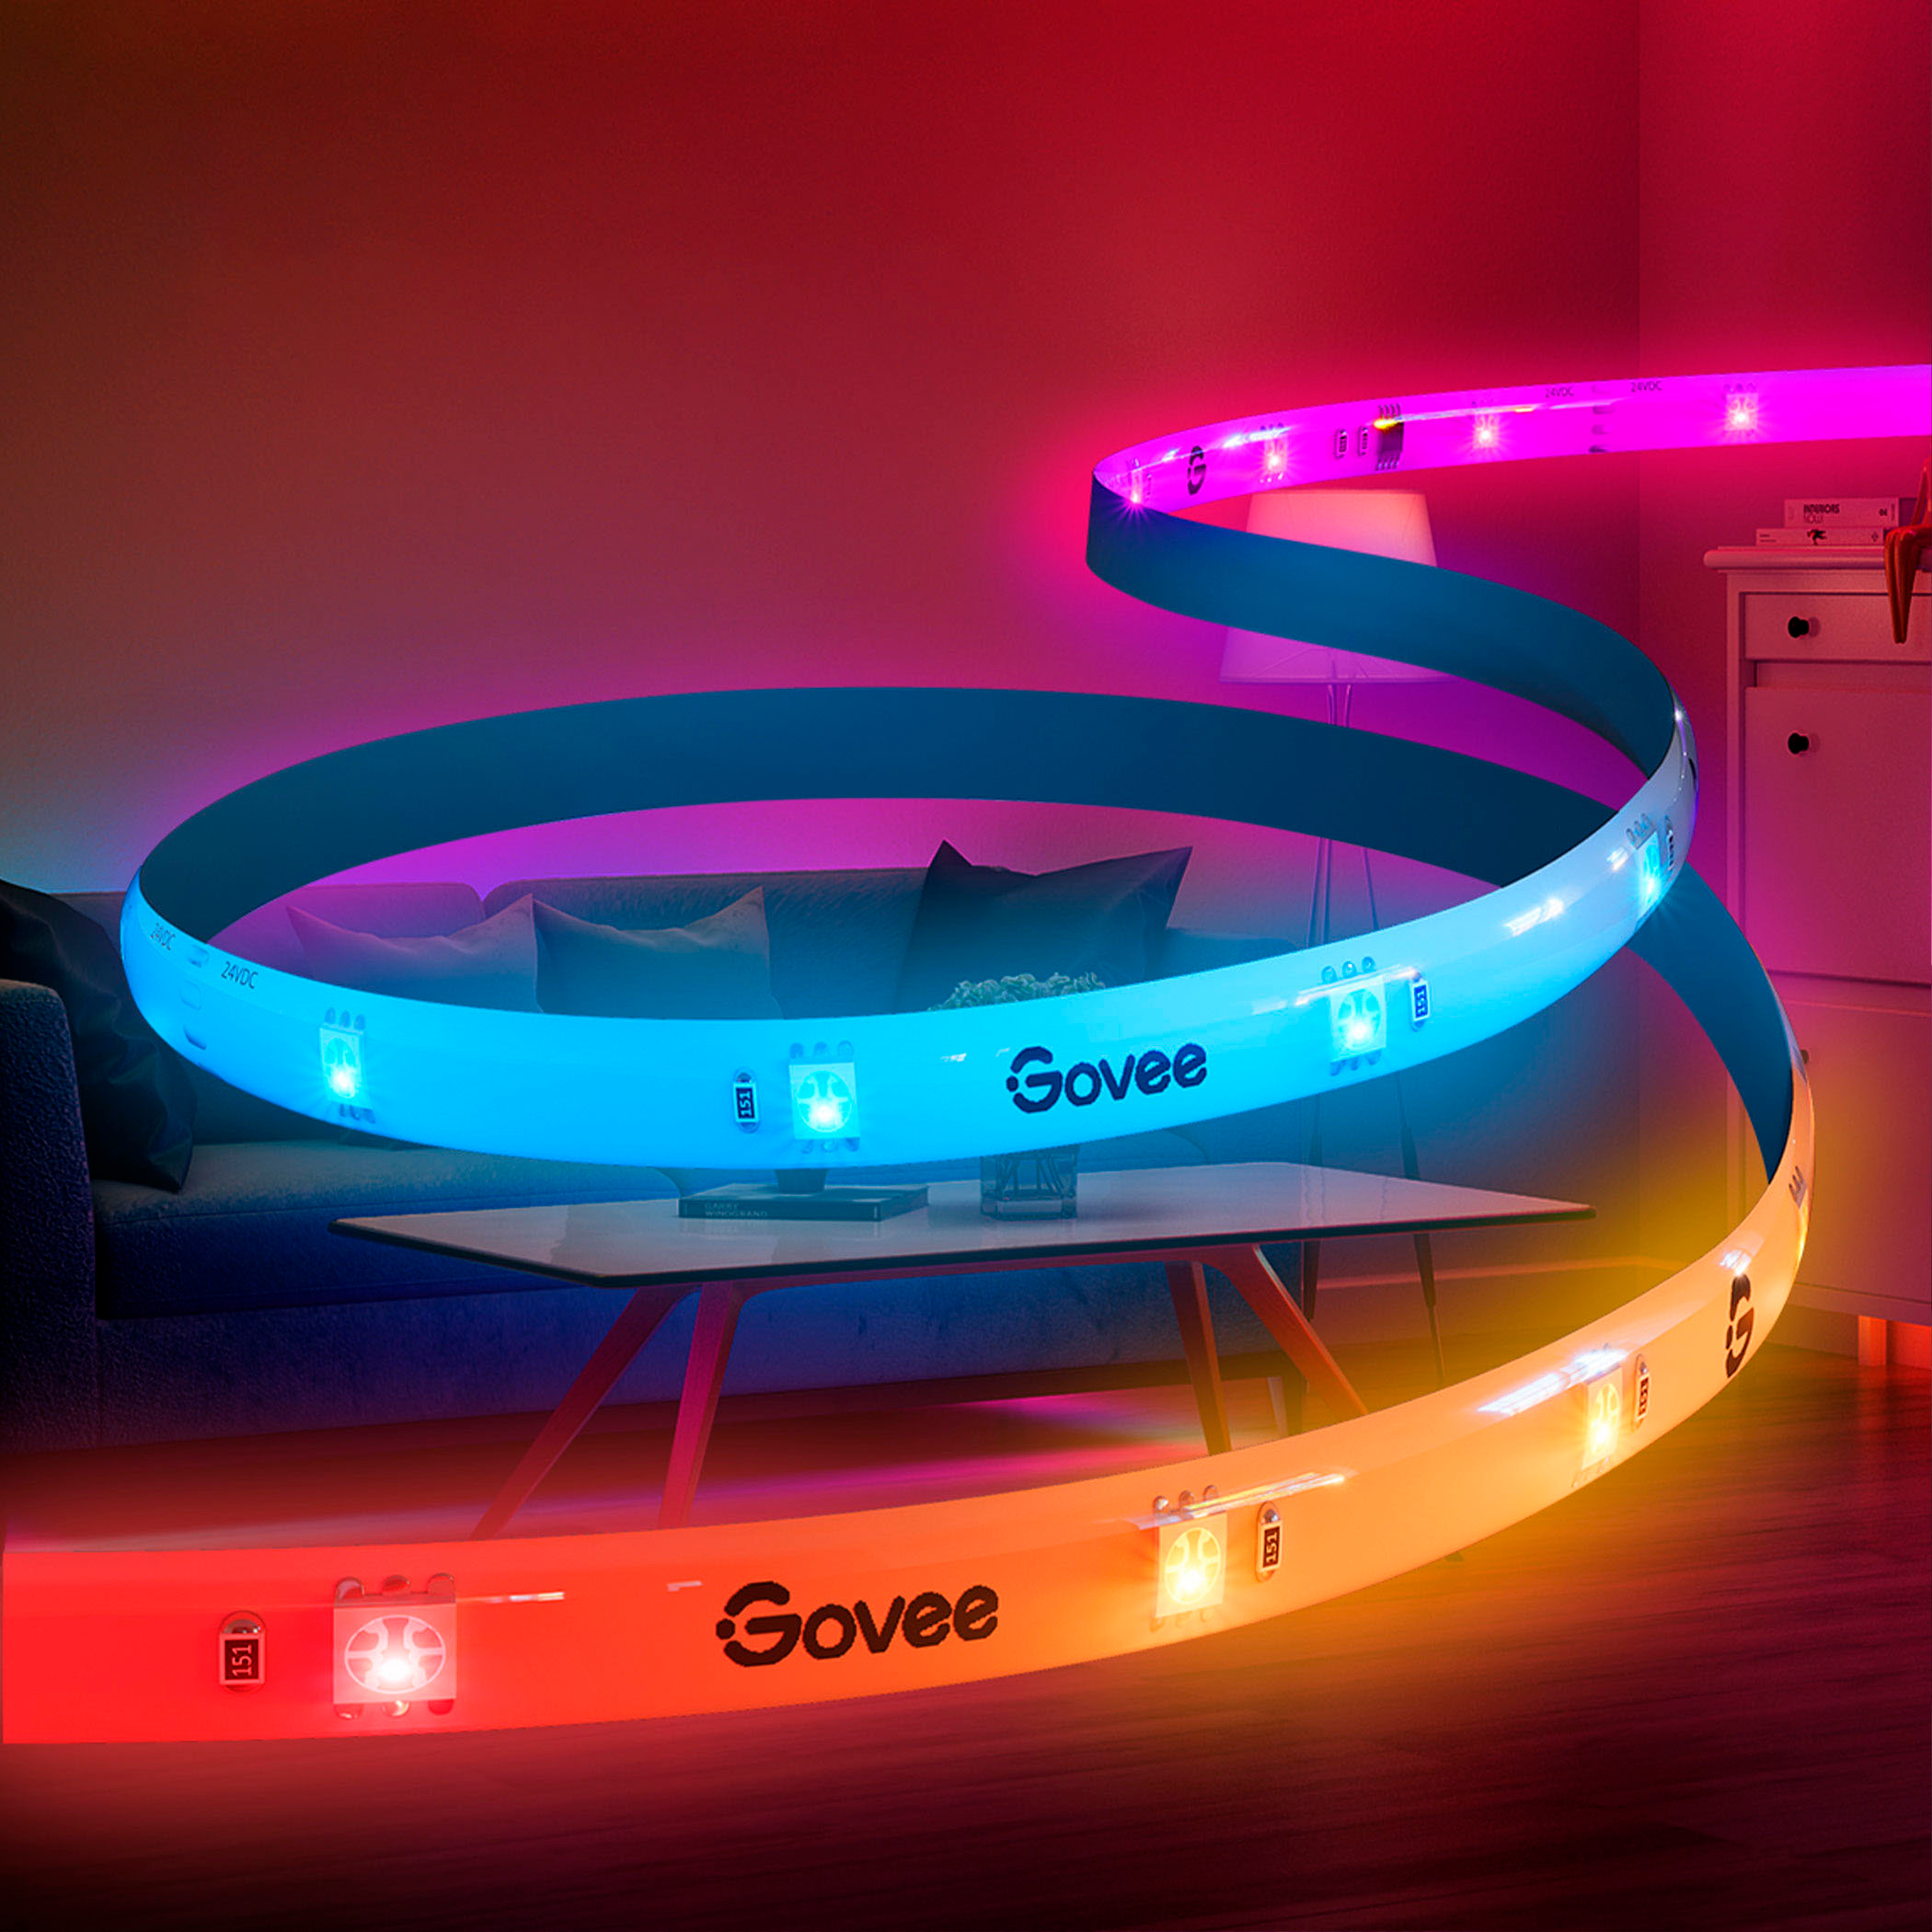 Govee RGBIC LED Neon Rope Light review: Sturdy, flexible, and fun